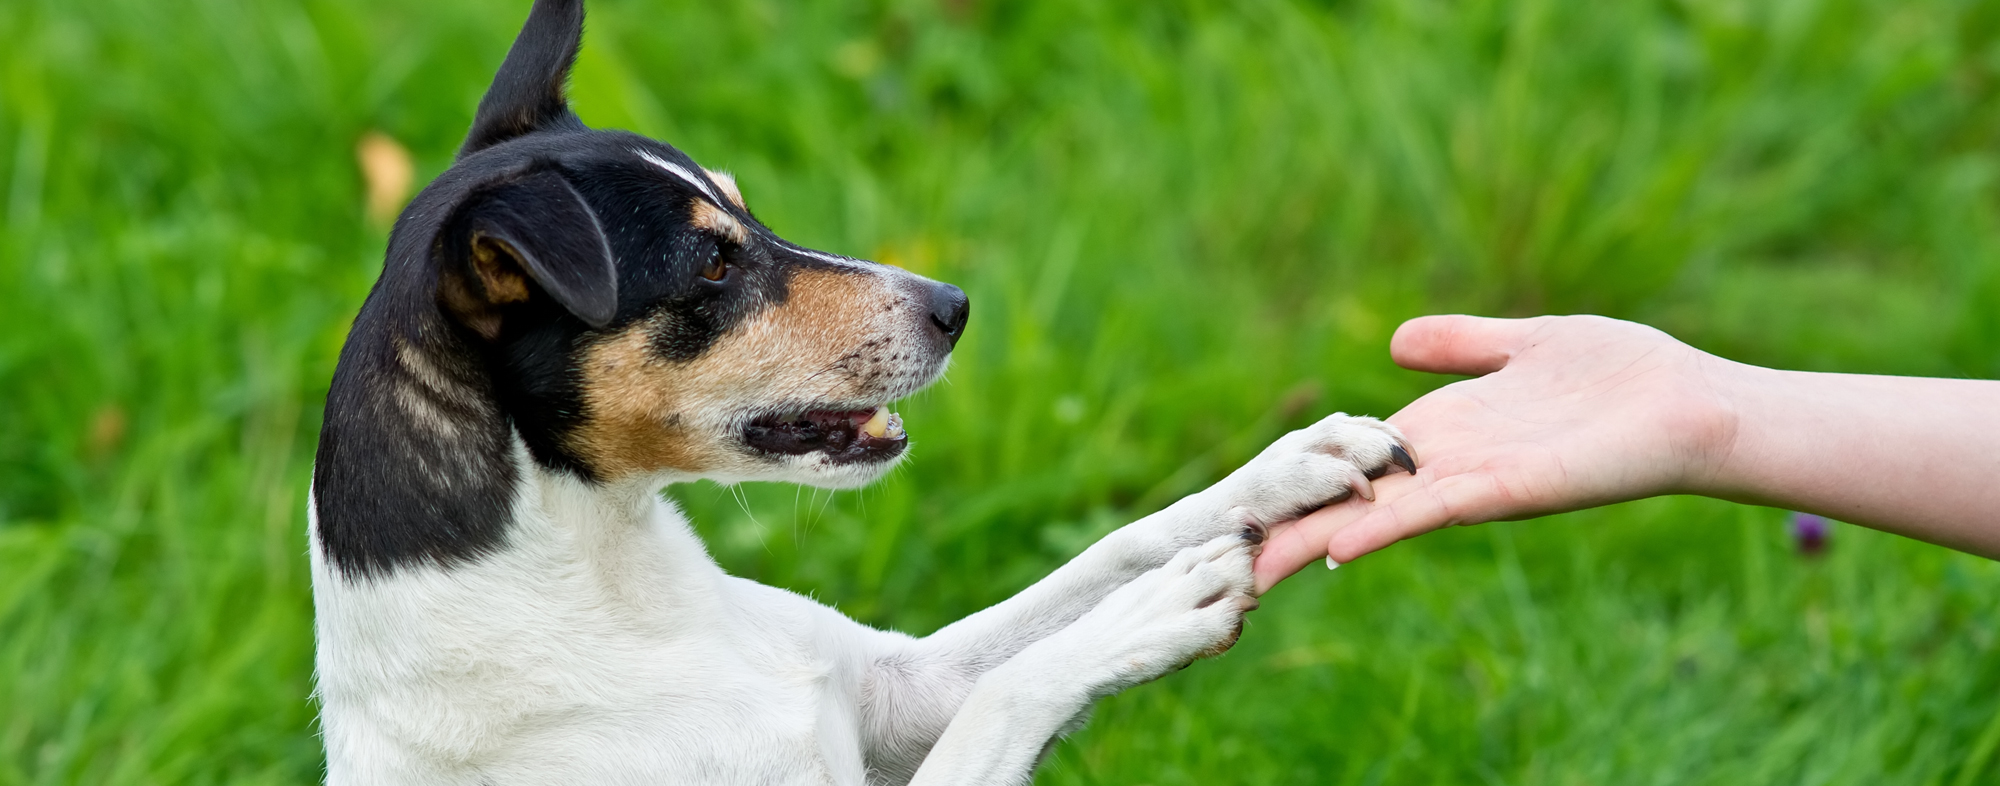 Holding out your palm, you can train your small dog to offers their paw